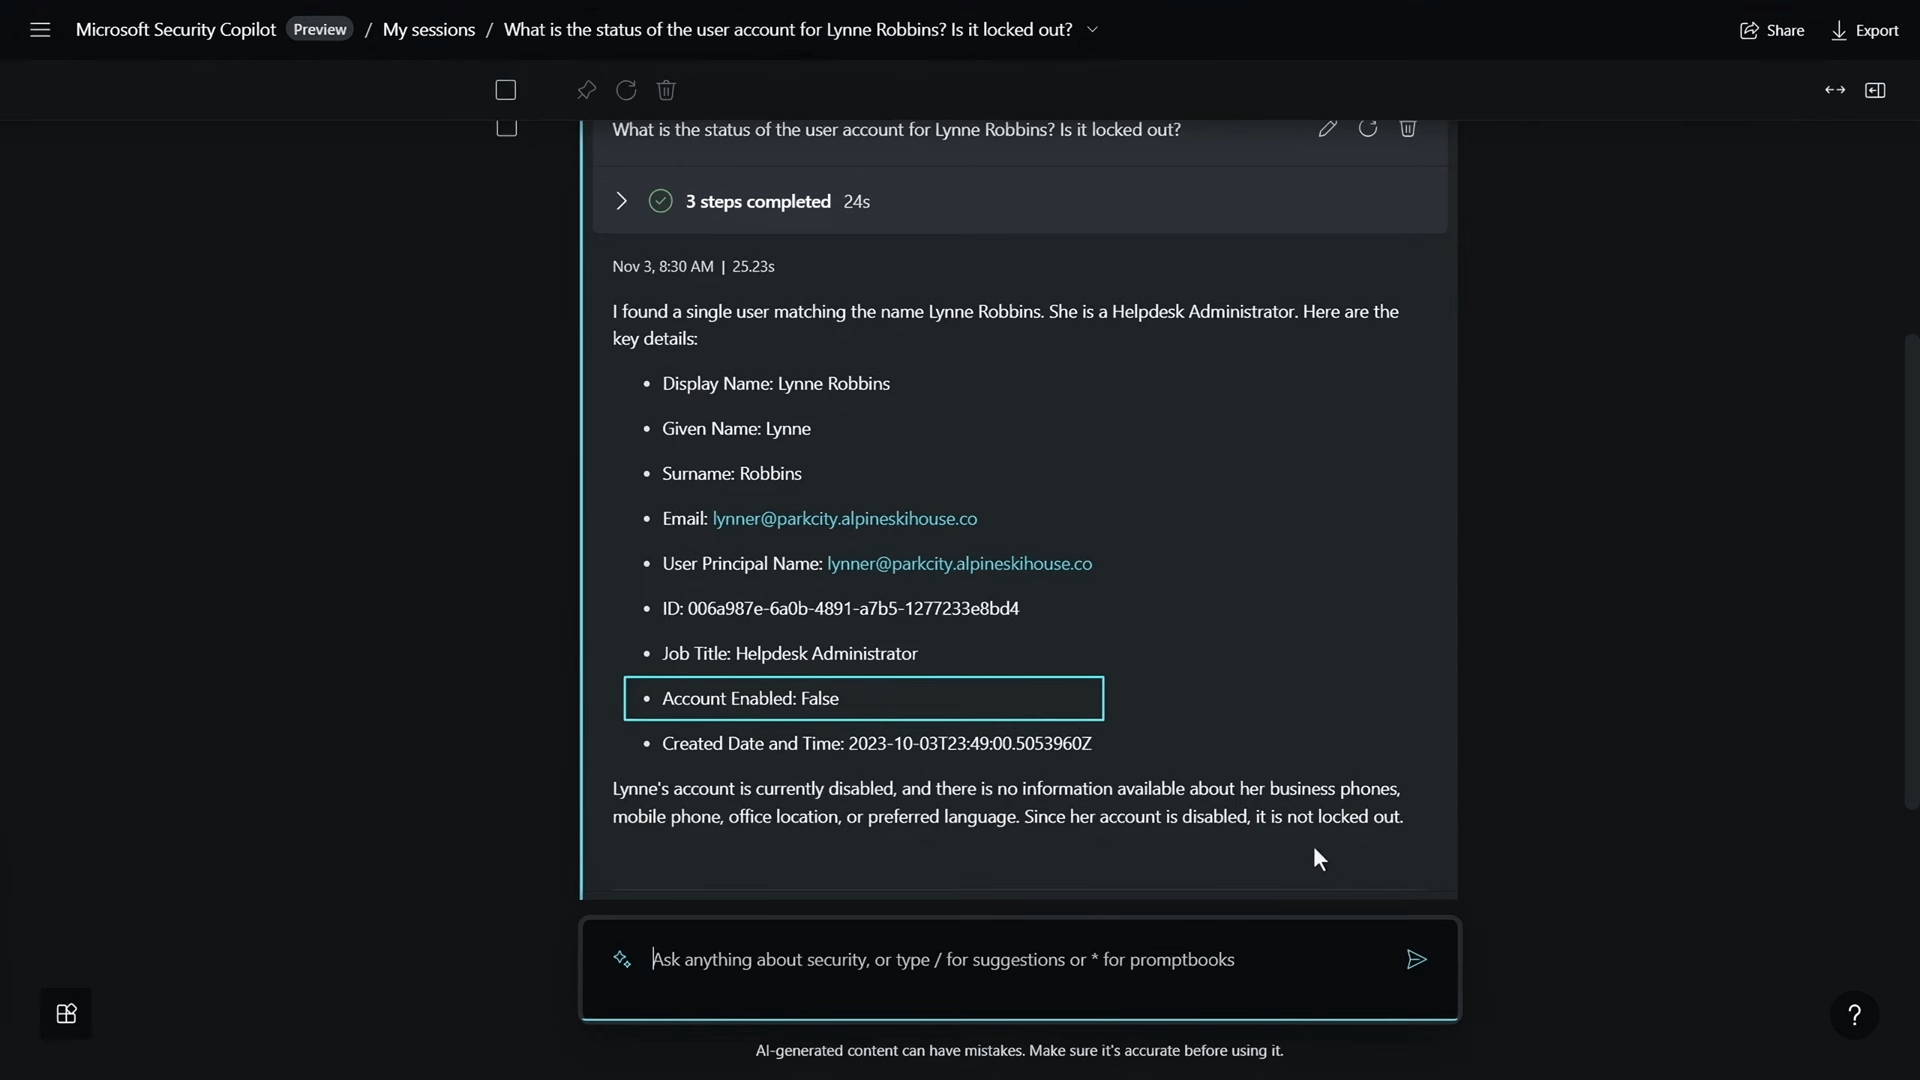 Microsoft Security Copilot - Account is Disabled